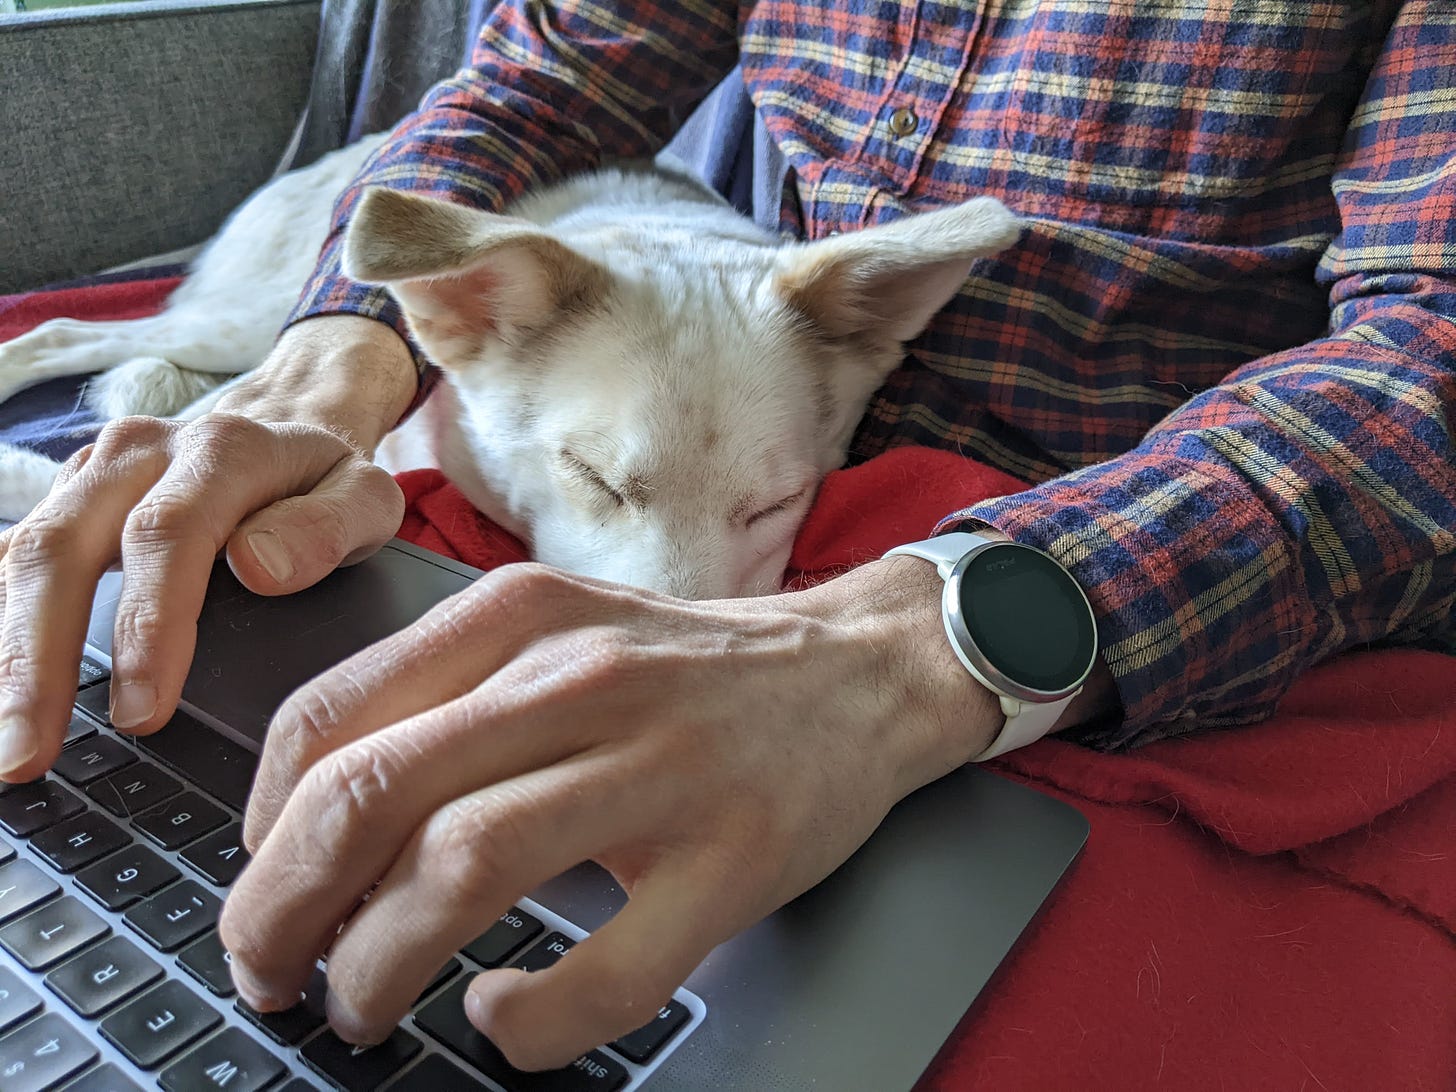 dog napping in the lap of someone working on a laptop